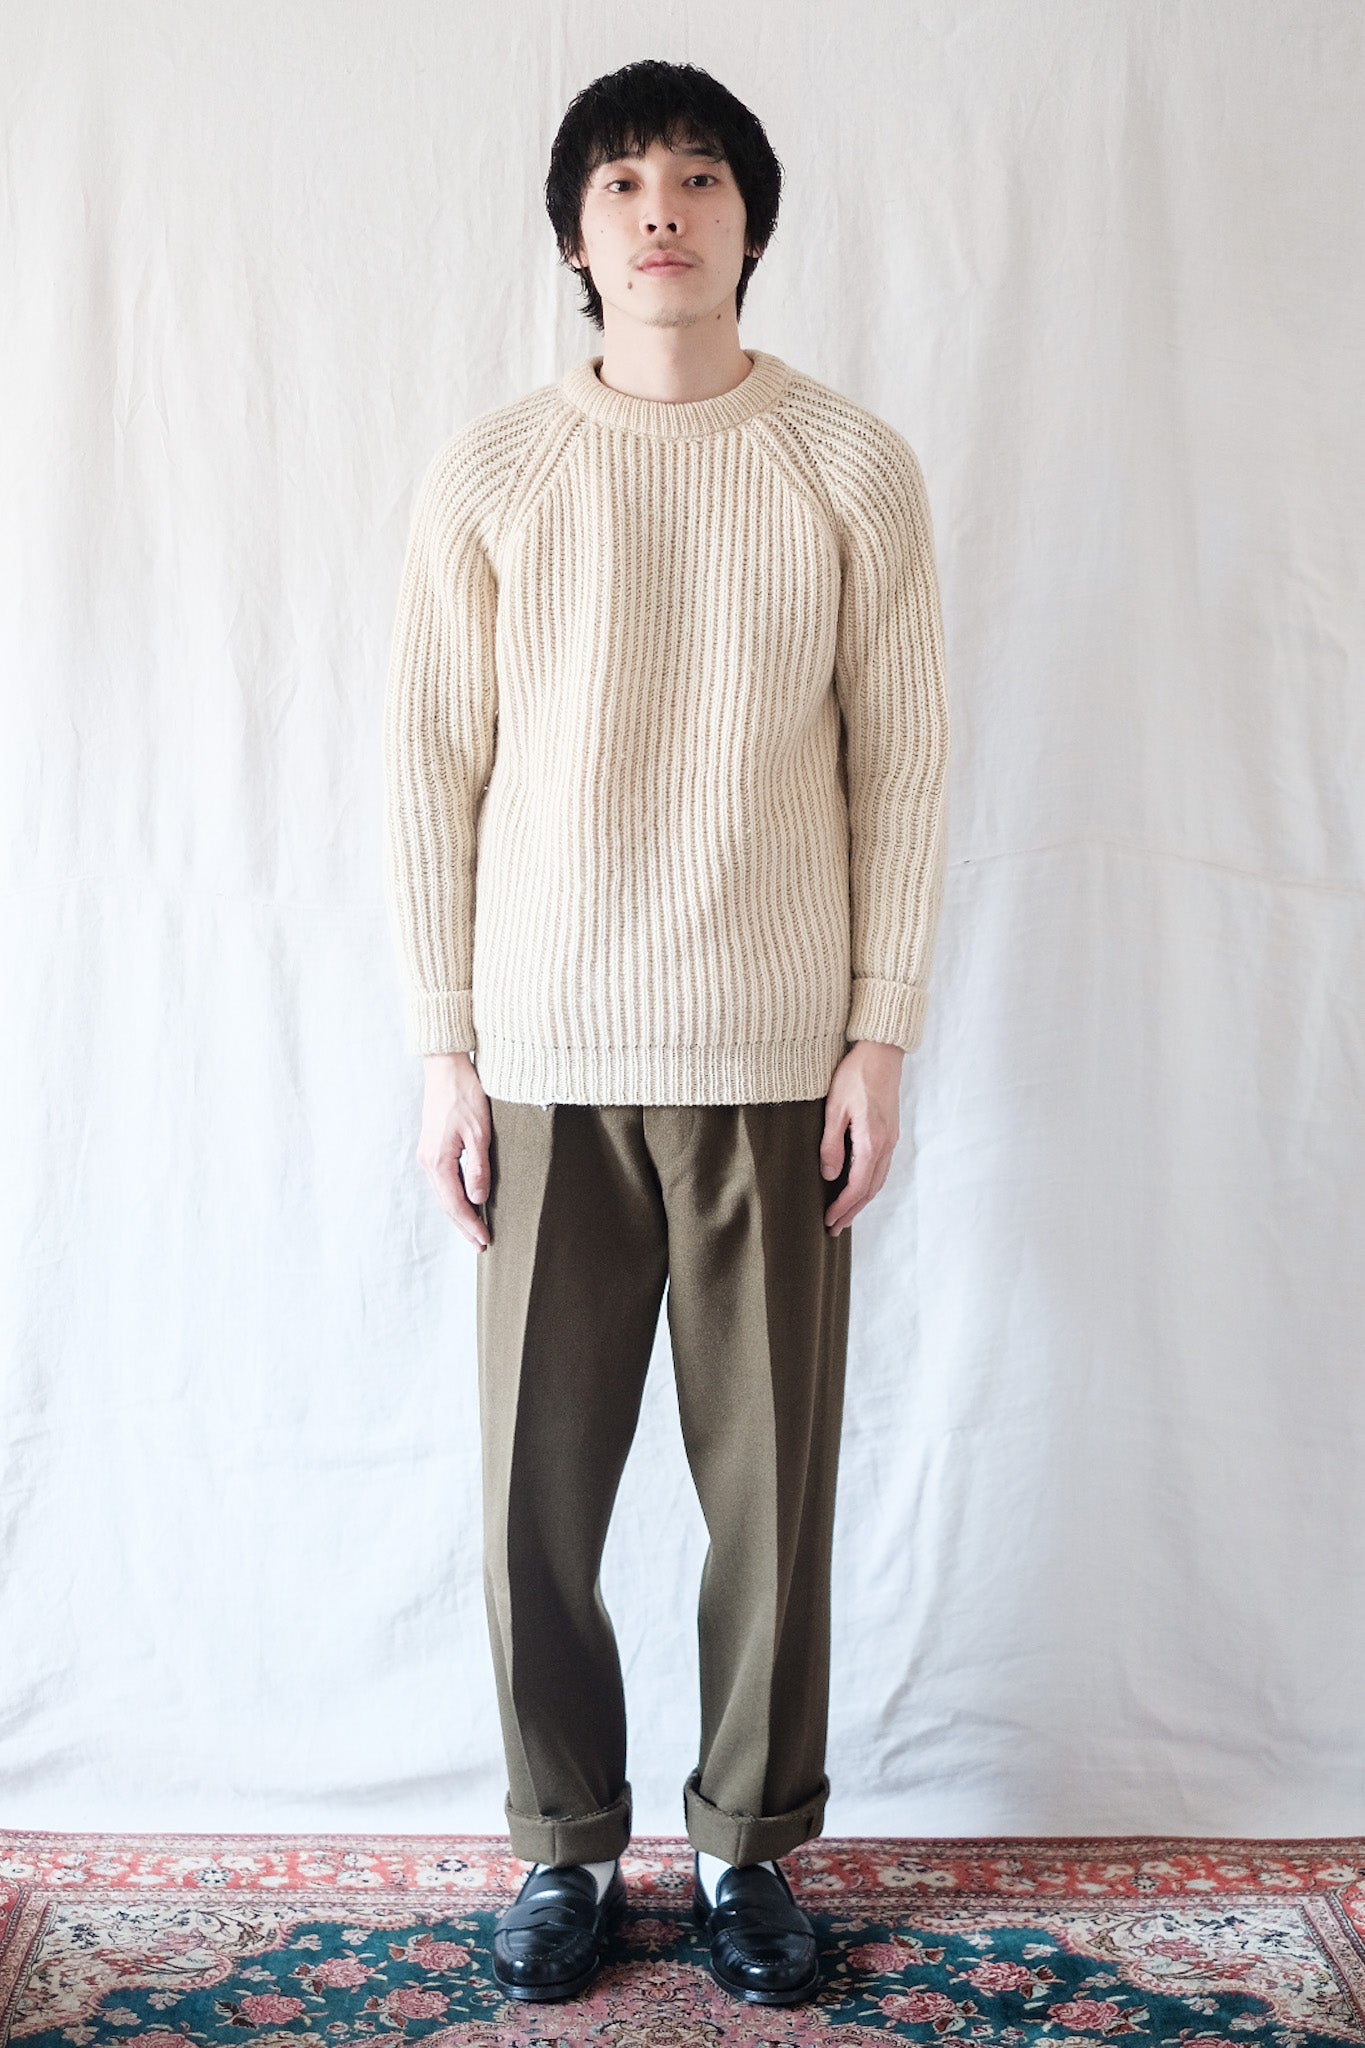 【~60's】British Army No.2 Dress Trousers